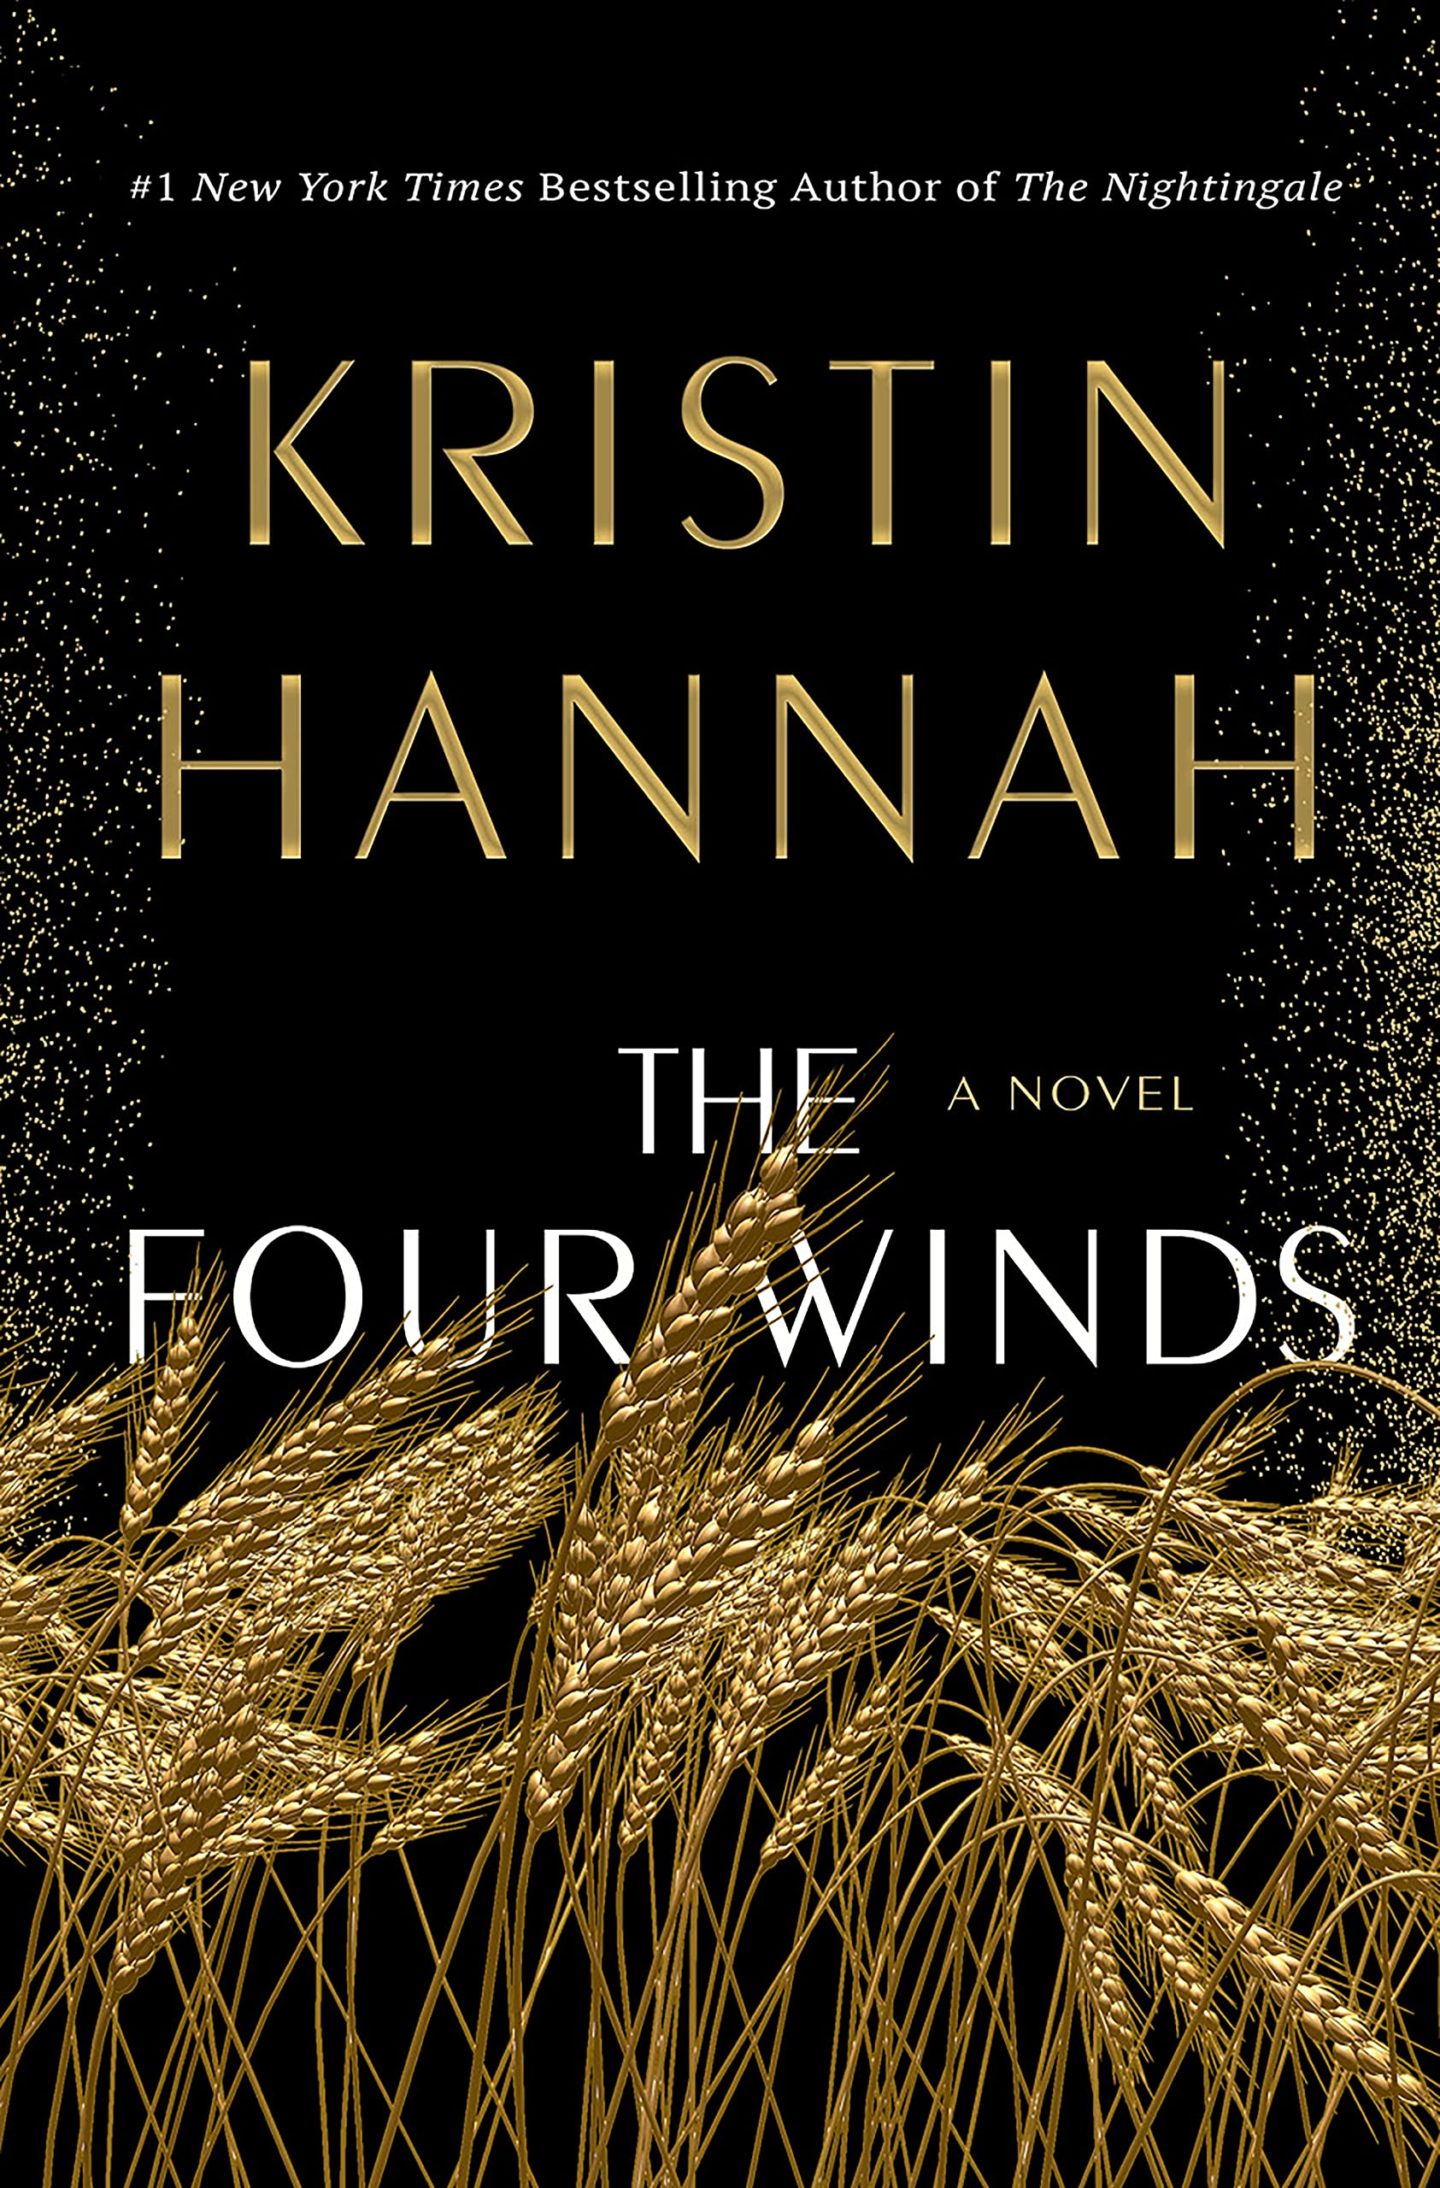 Four-WInds-Review-Krisitn-hannah-1440x2188 My Complete Book List - Read in 2022